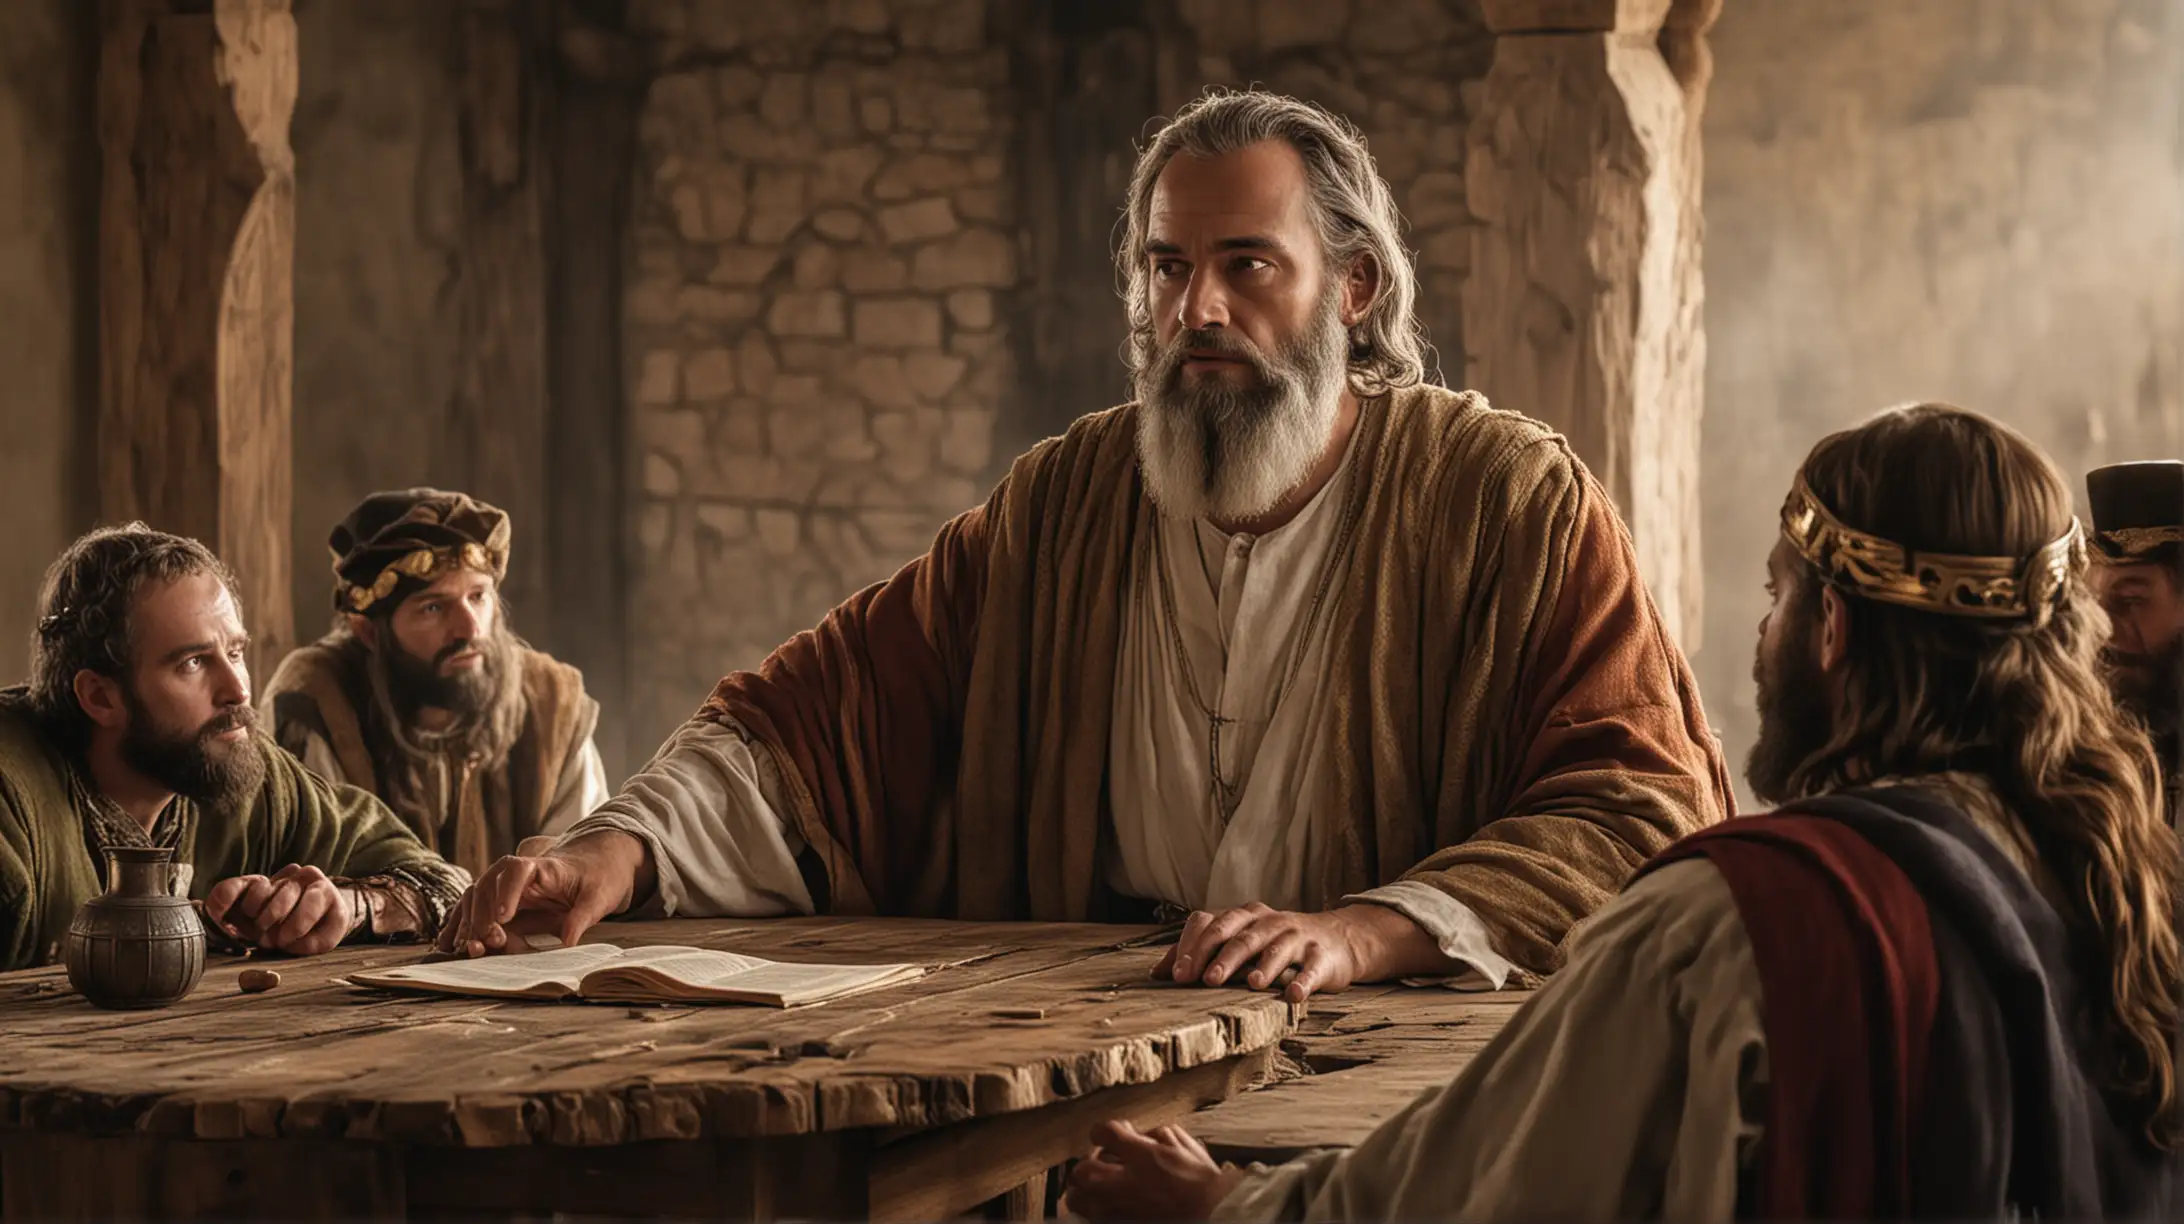 Biblical King at Wooden Table Conversing with Subjects